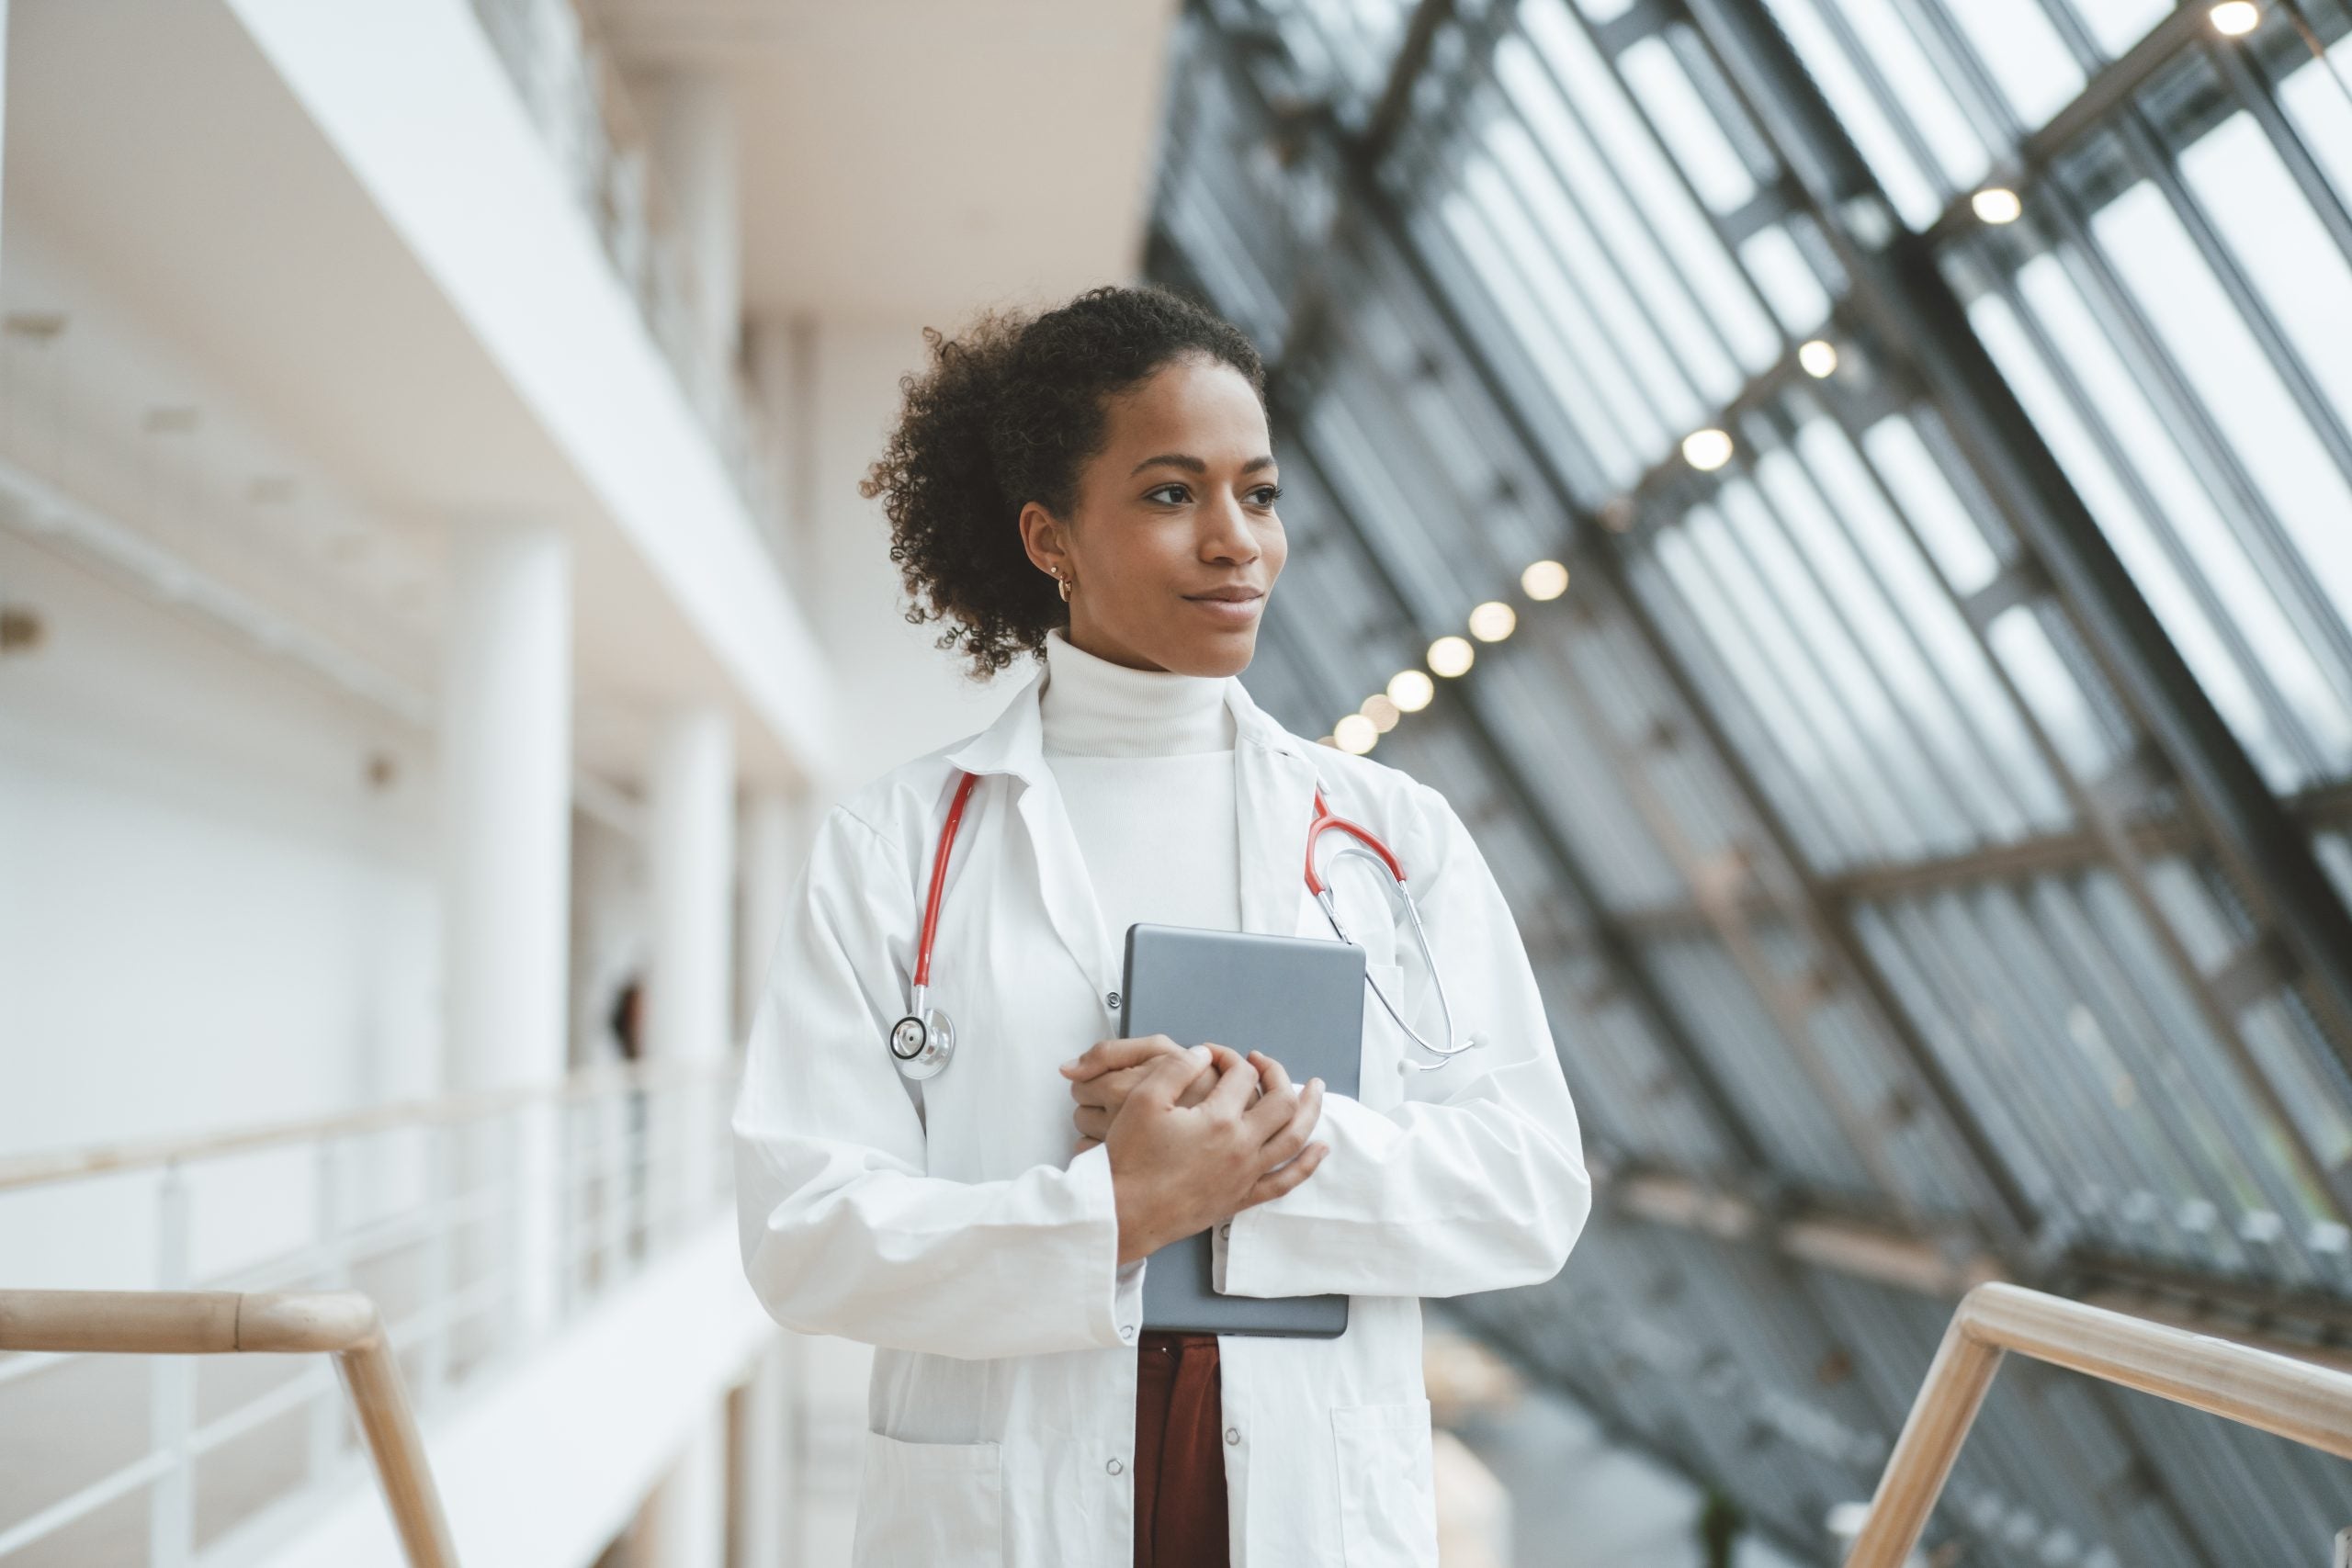 Women Doctors Are Finally Starting To Earn Almost As Much As Men—But It Hasn't Gotten Any Better For Black Physicians